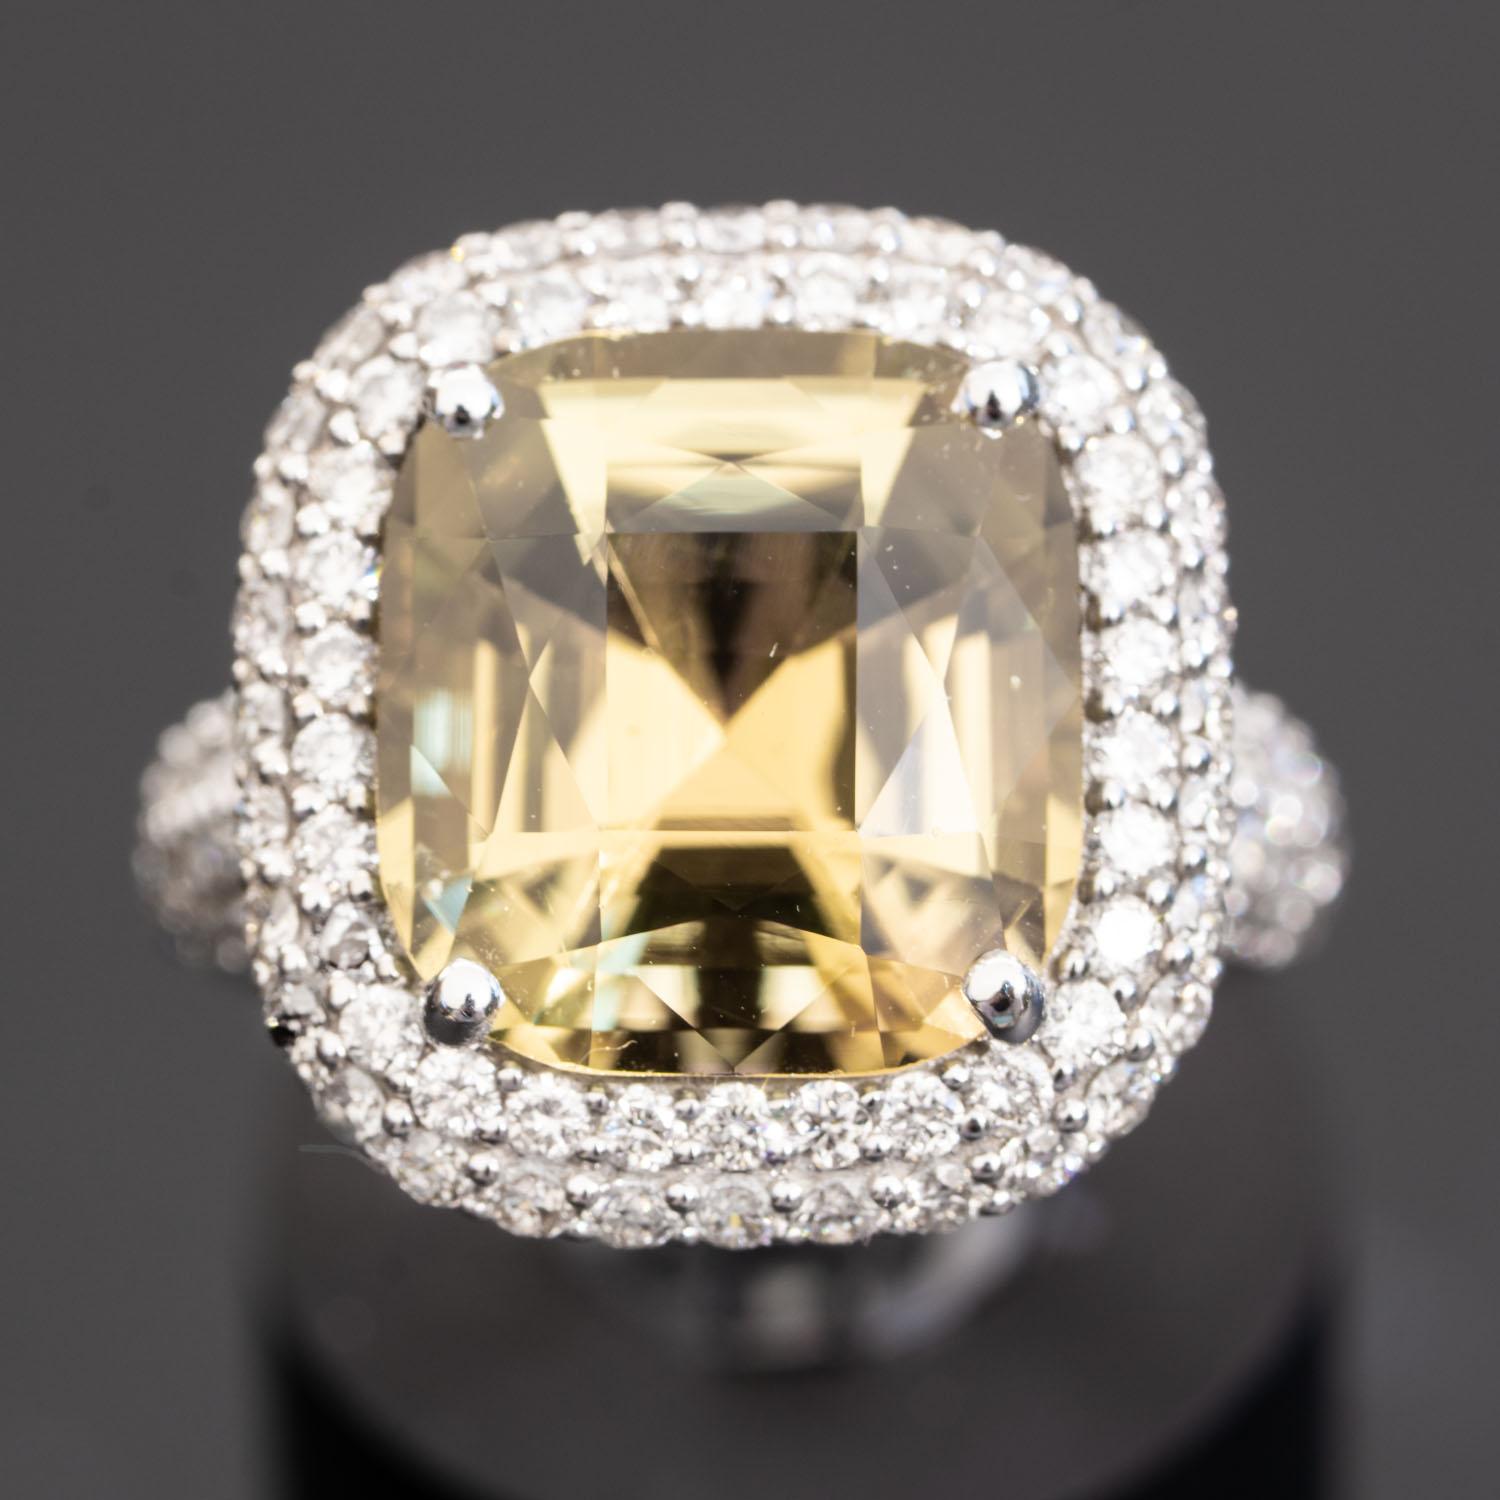 This cushion cut tourmaline diamond ring is simply stunning! The large 8.40 carat (10.5mmX10.5mm) natural central tourmaline surrounded by 1.85 carat sparkling natural diamonds D- F VS.

One of a kind
Main Stone: Natural, Genuine Tourmaline
Carat: